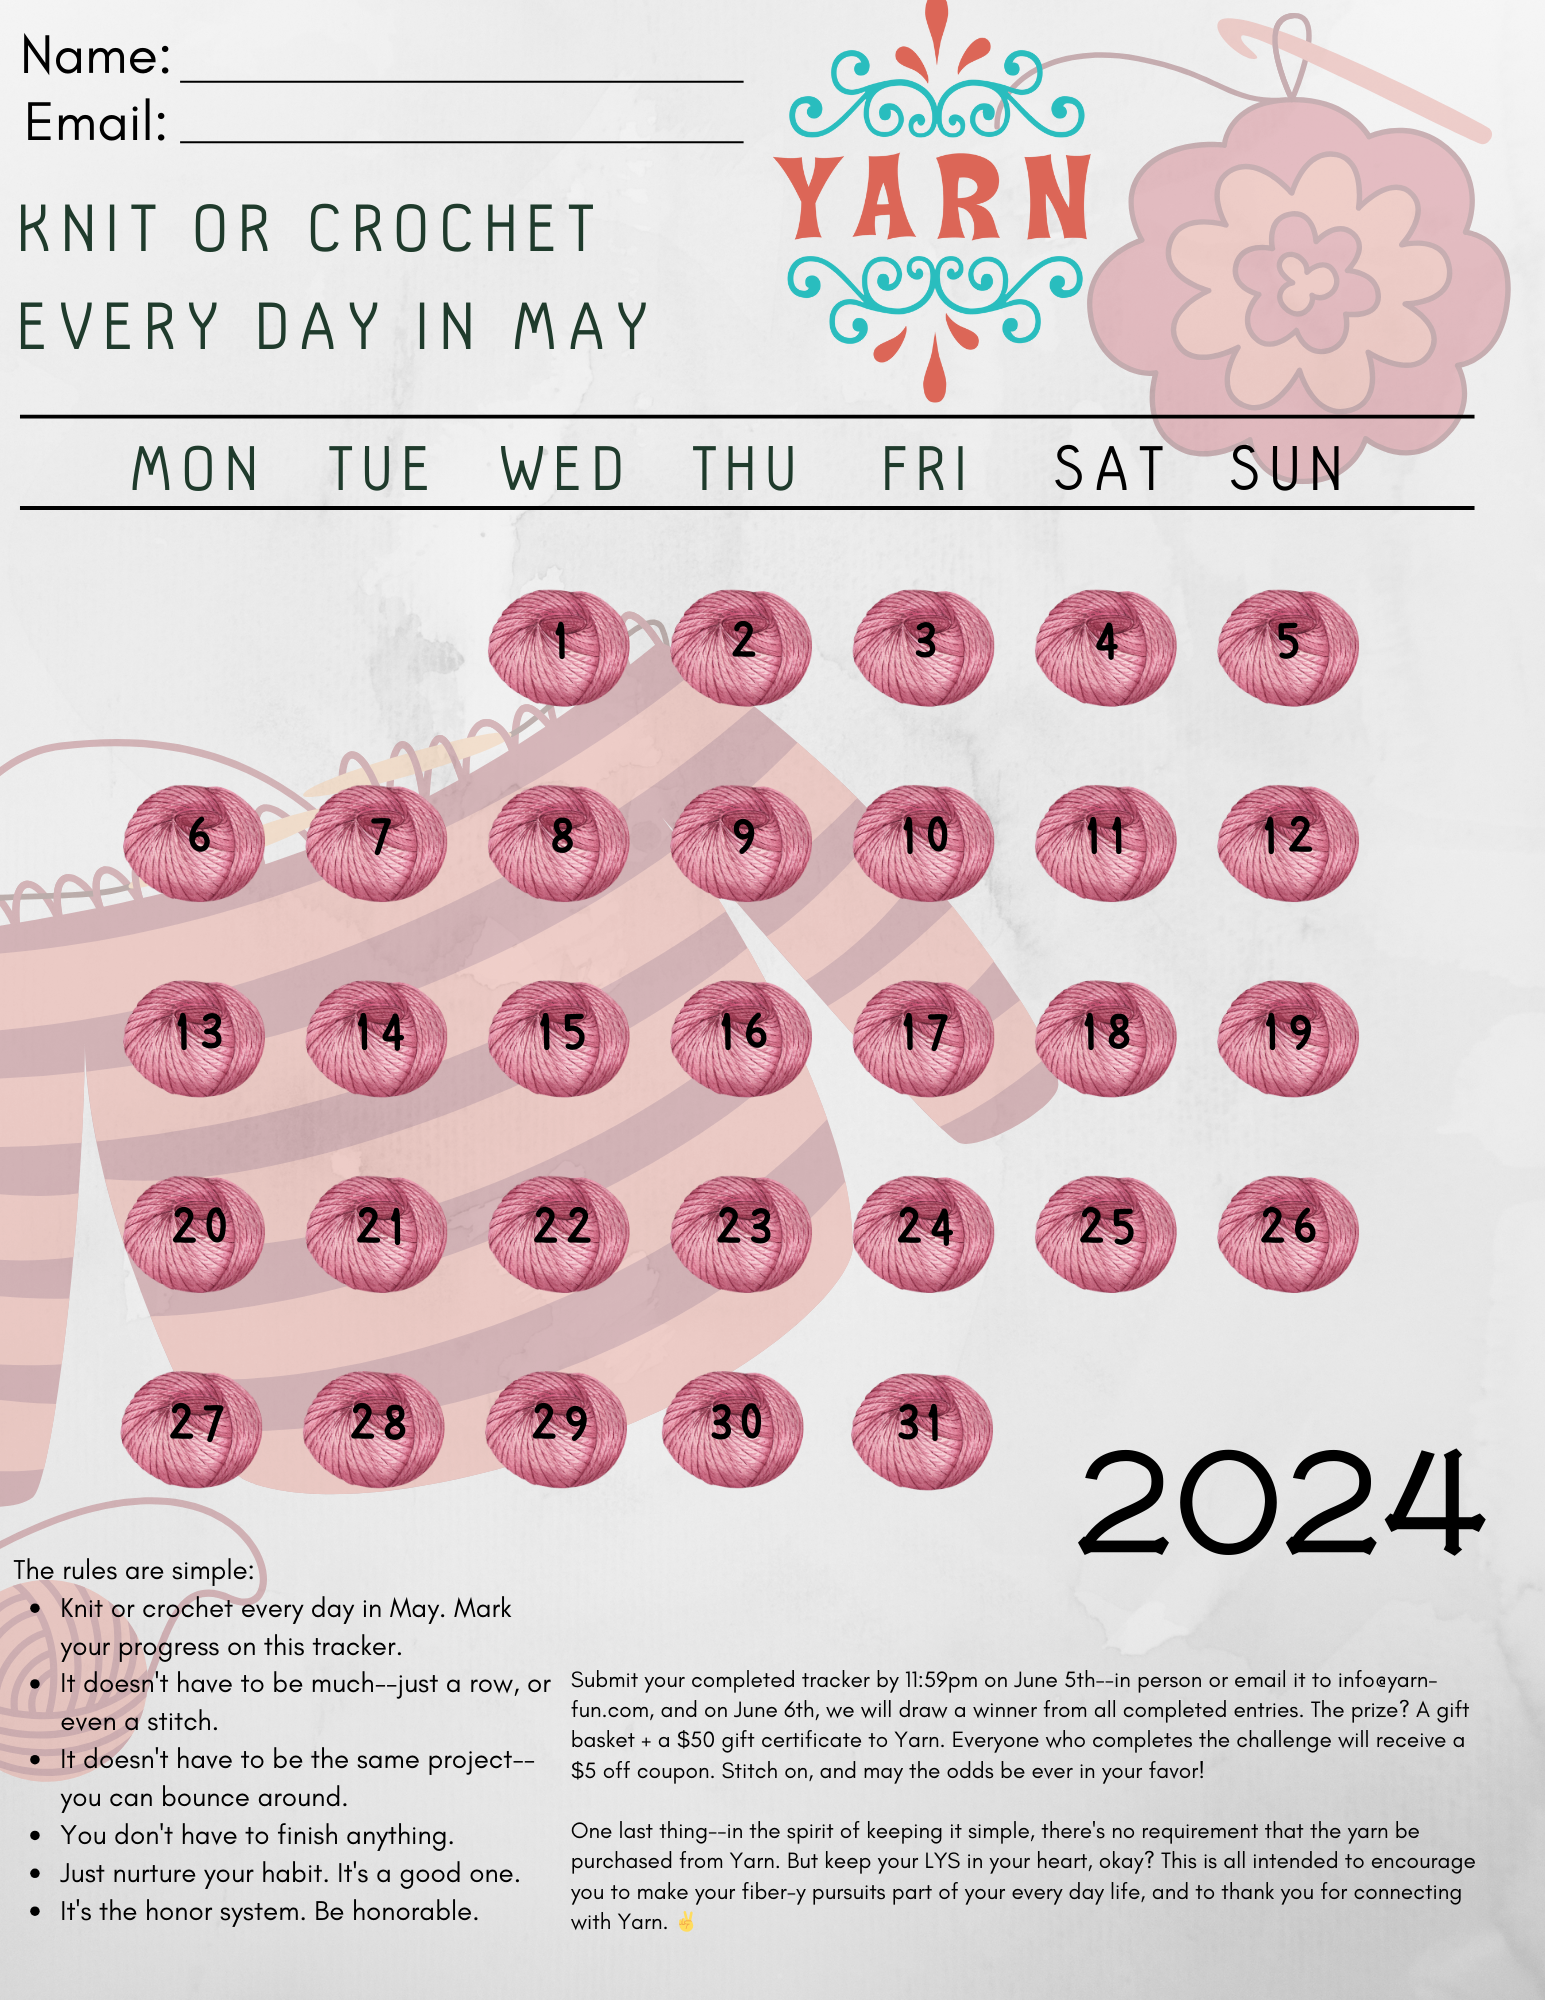 Knit or Crochet Every Day in May Event